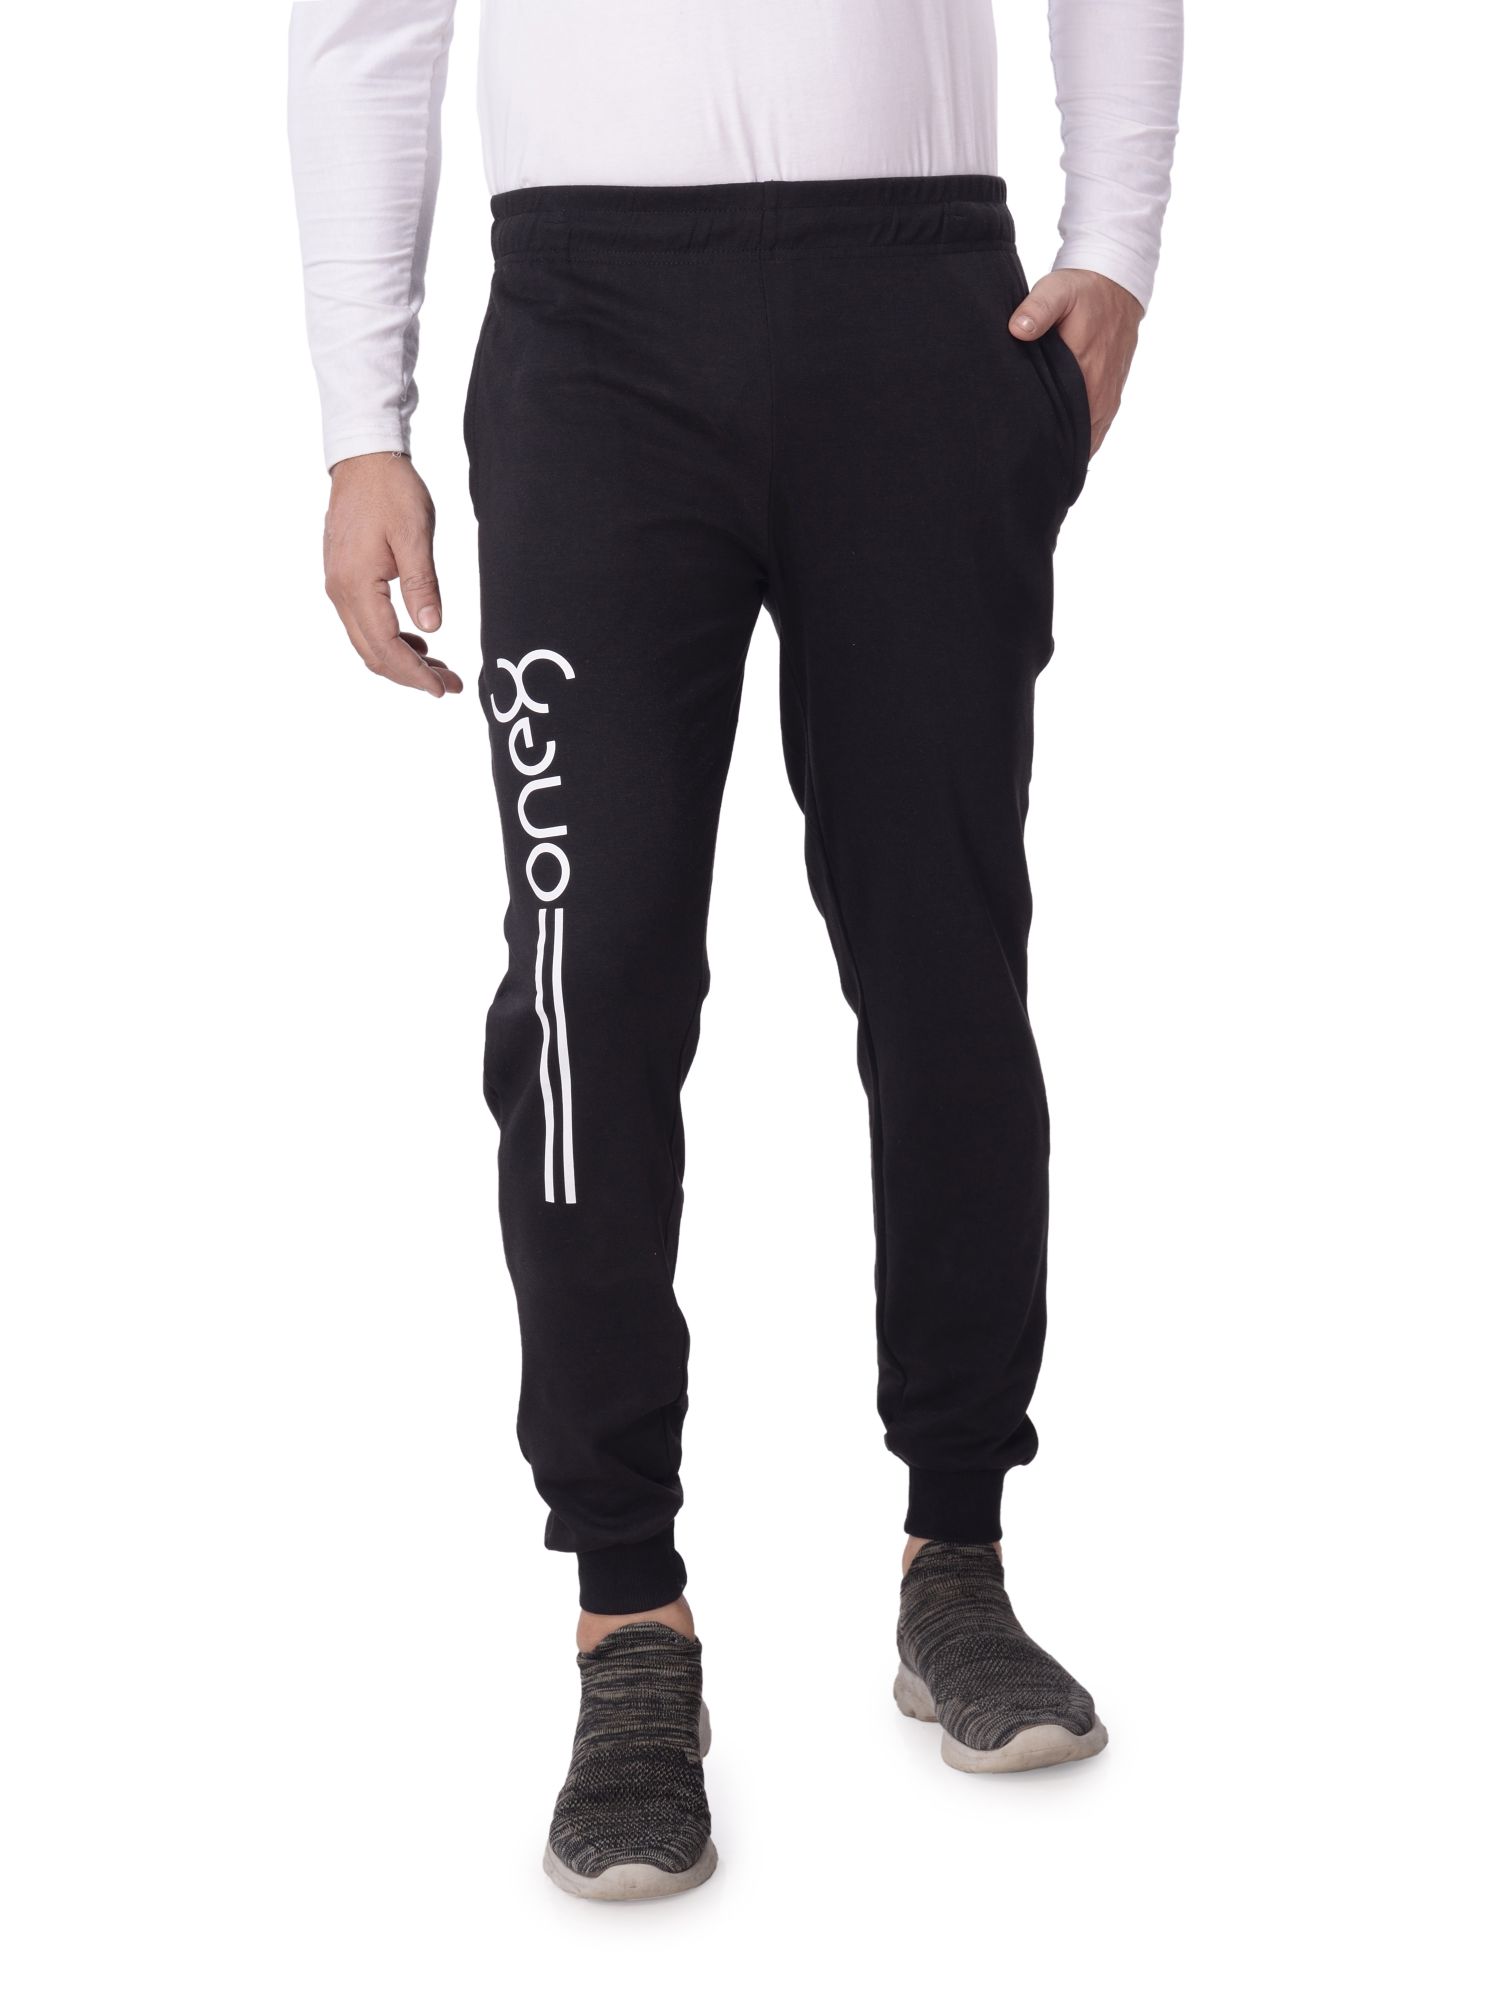 Puma One8 Trackpant First Copy in Mumbai at best price by Formula Grey  Wholesale Clothing - Justdial